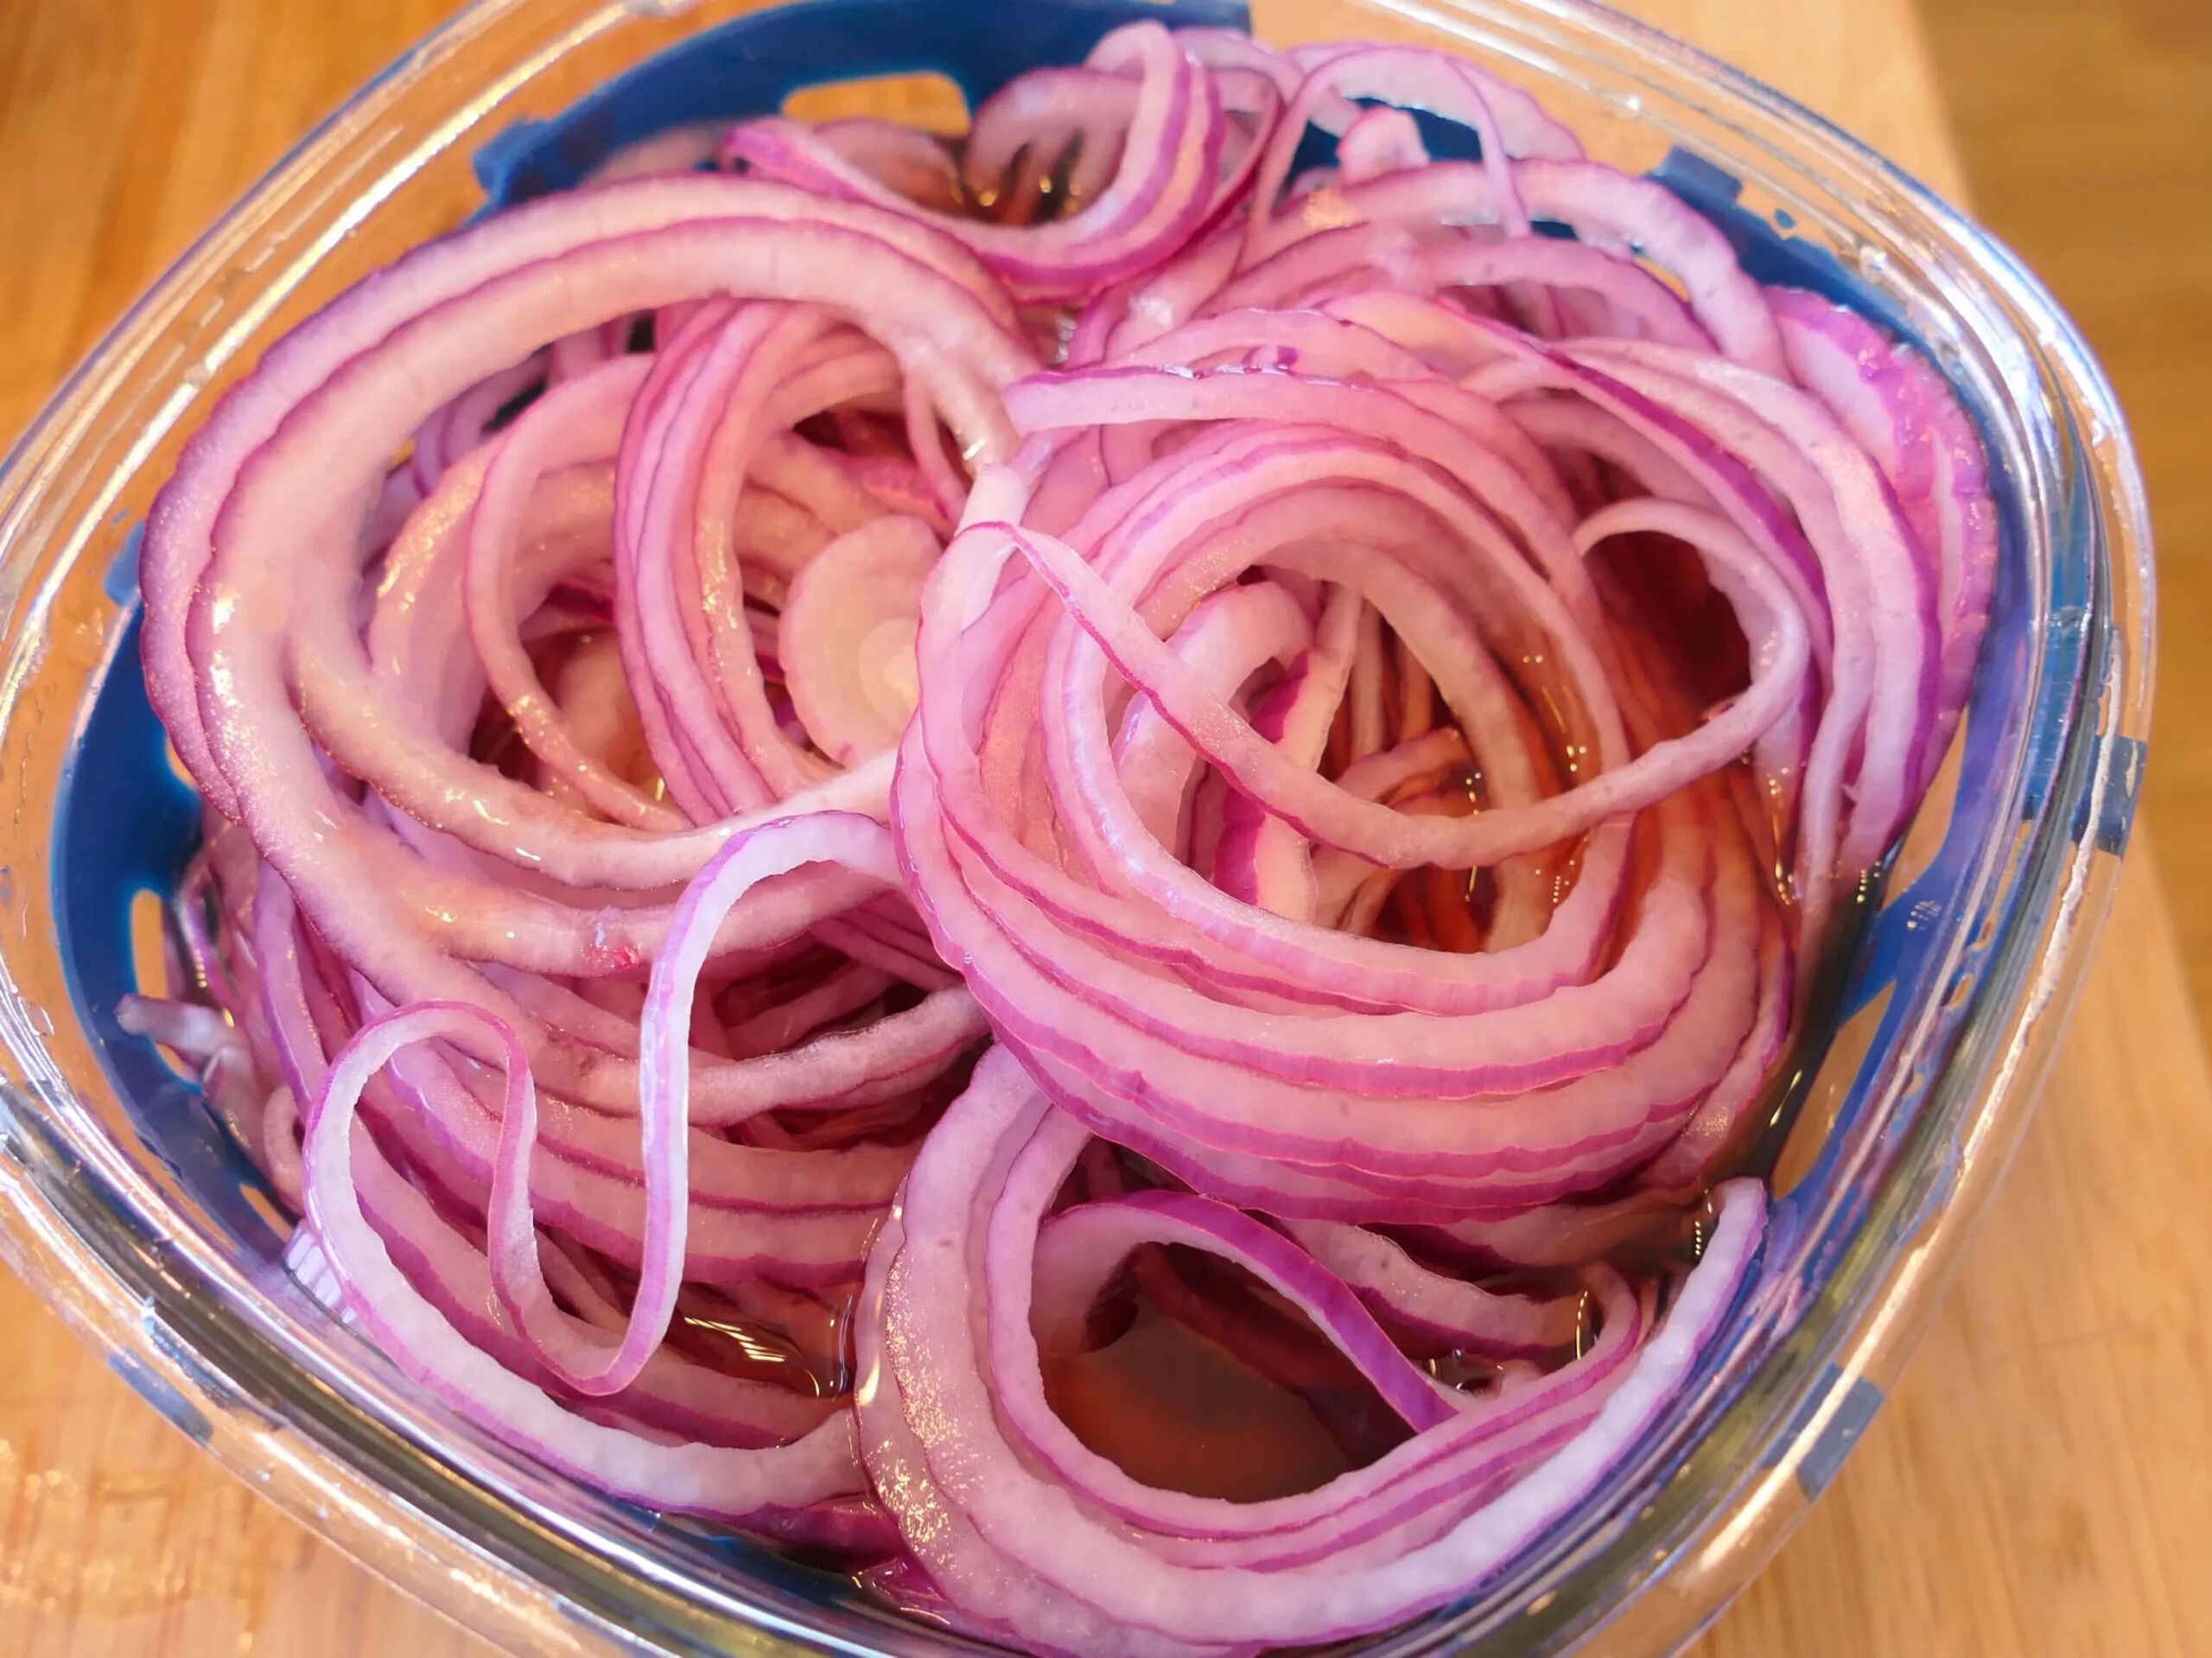 How To Store Cut Onions In The Refrigerator Without Smell